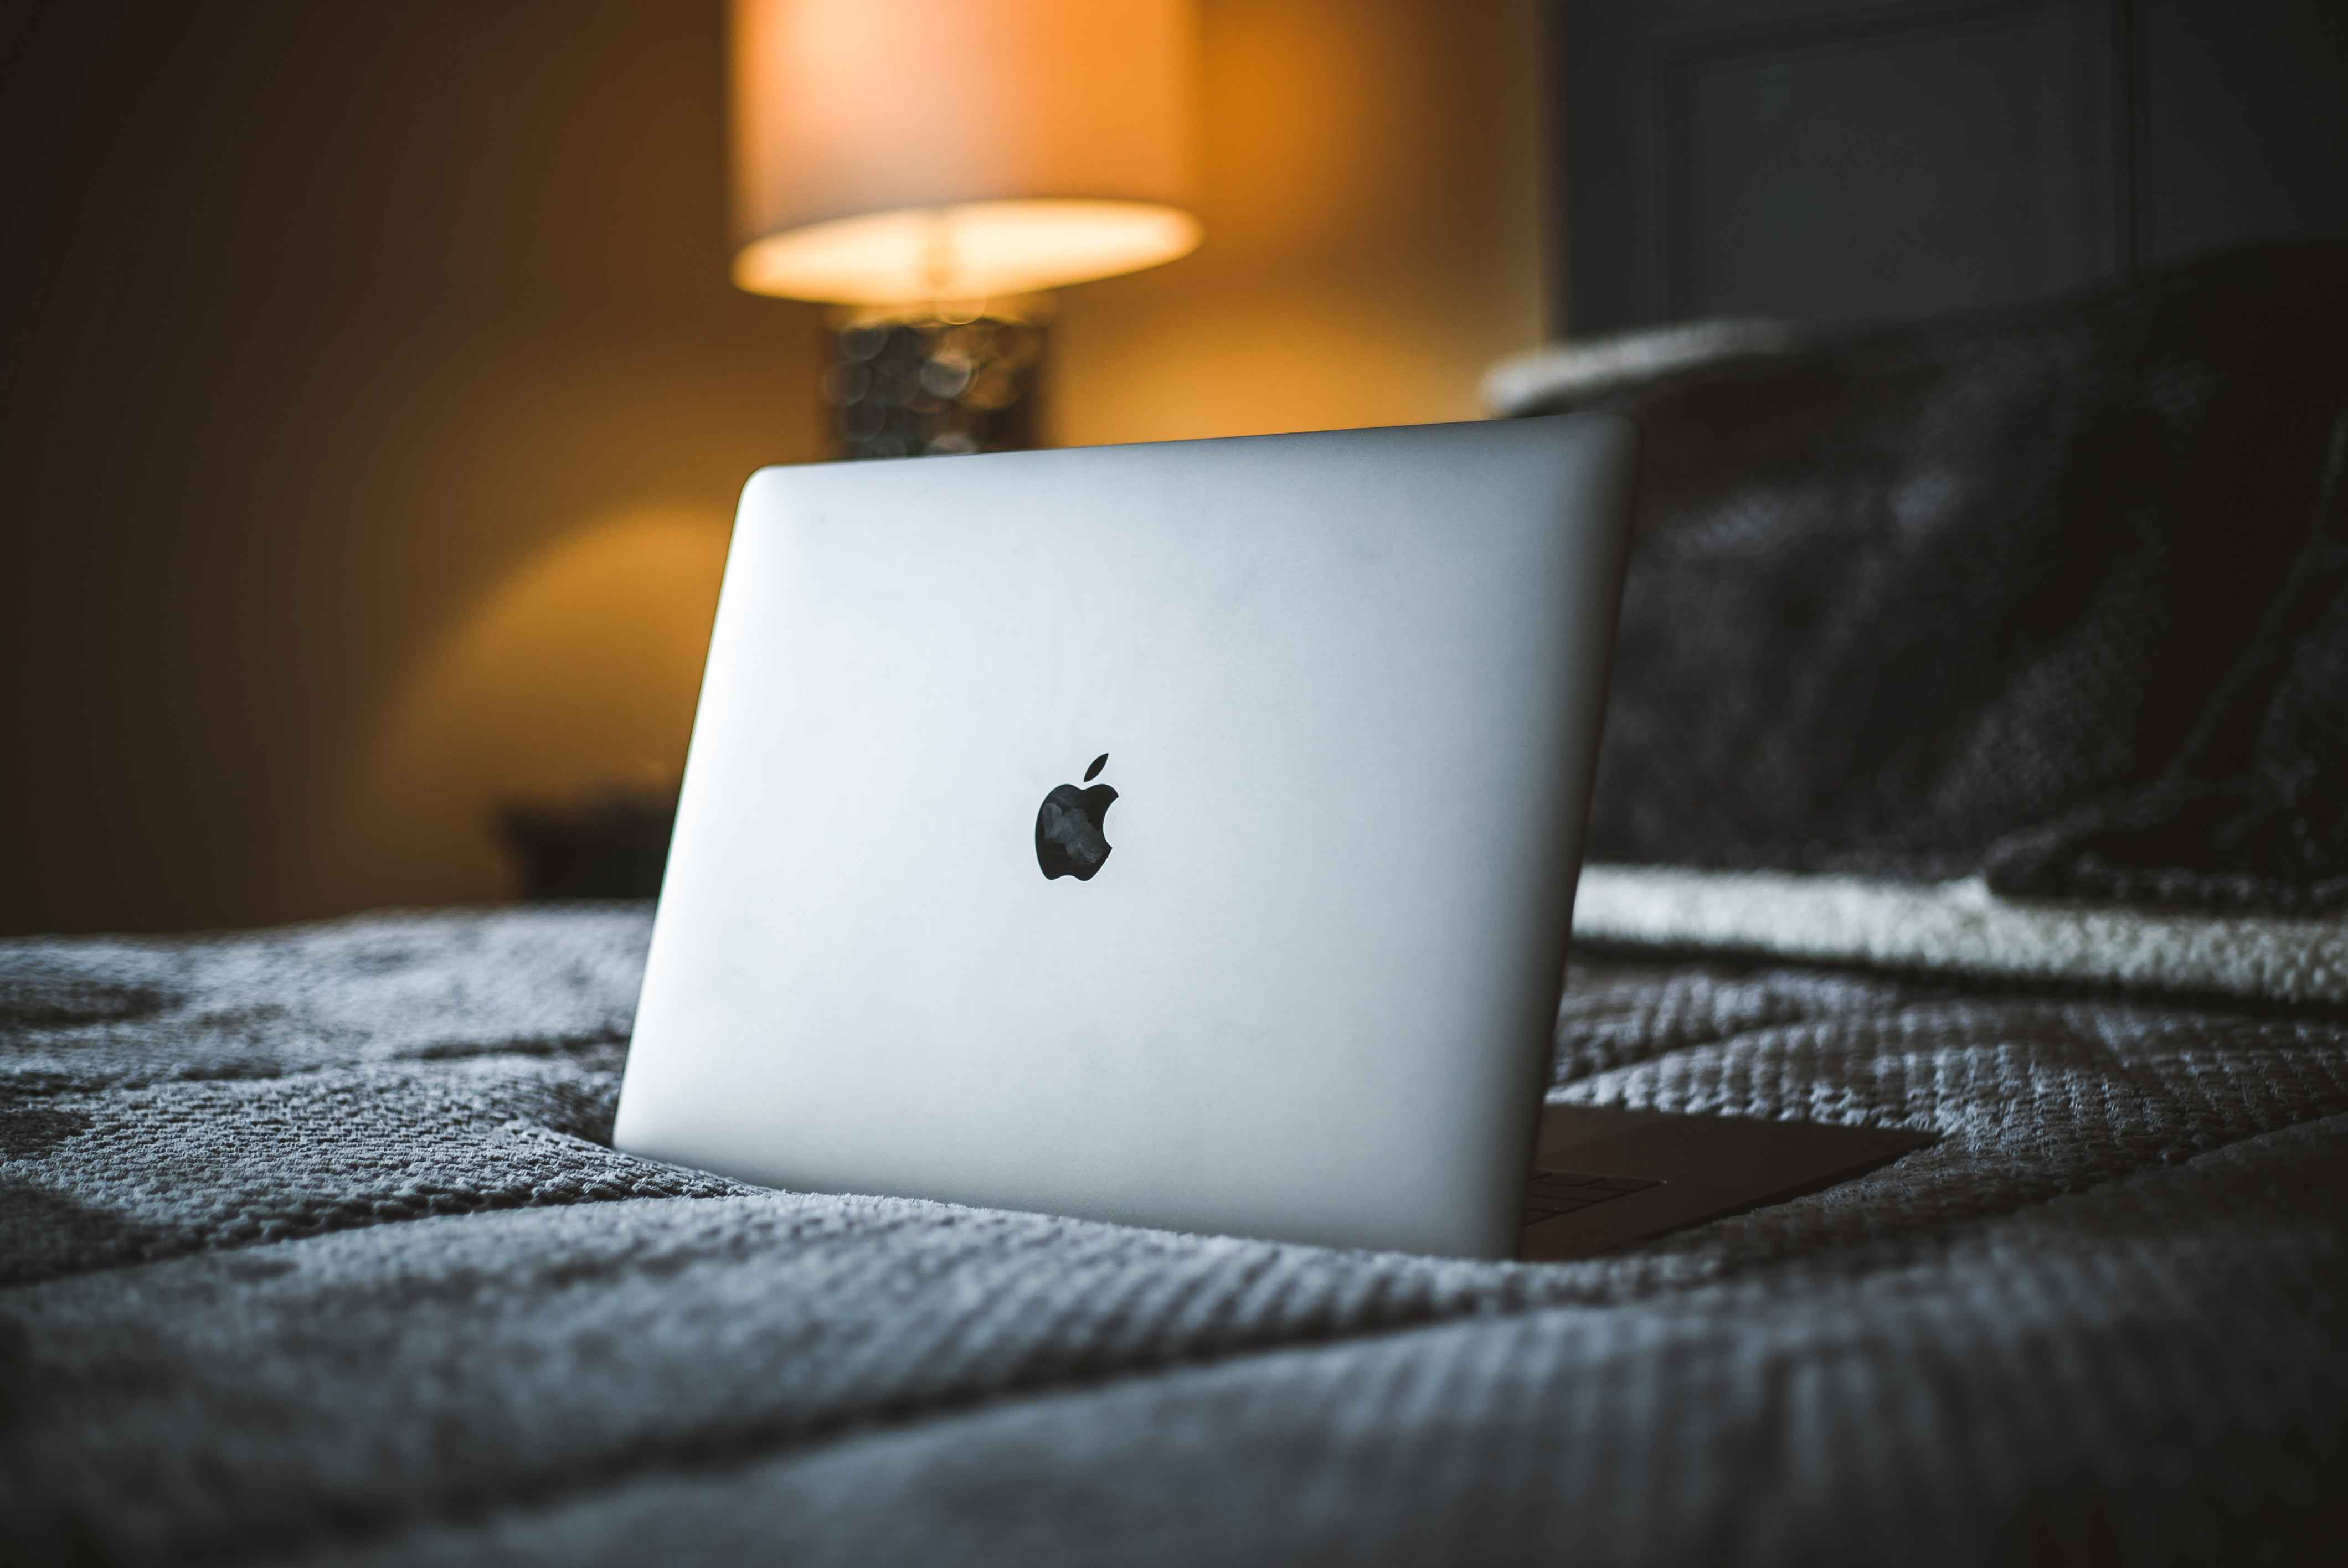 Troubleshooting Guide: Why Your Macbook Battery Won't Charge and How to Fix It